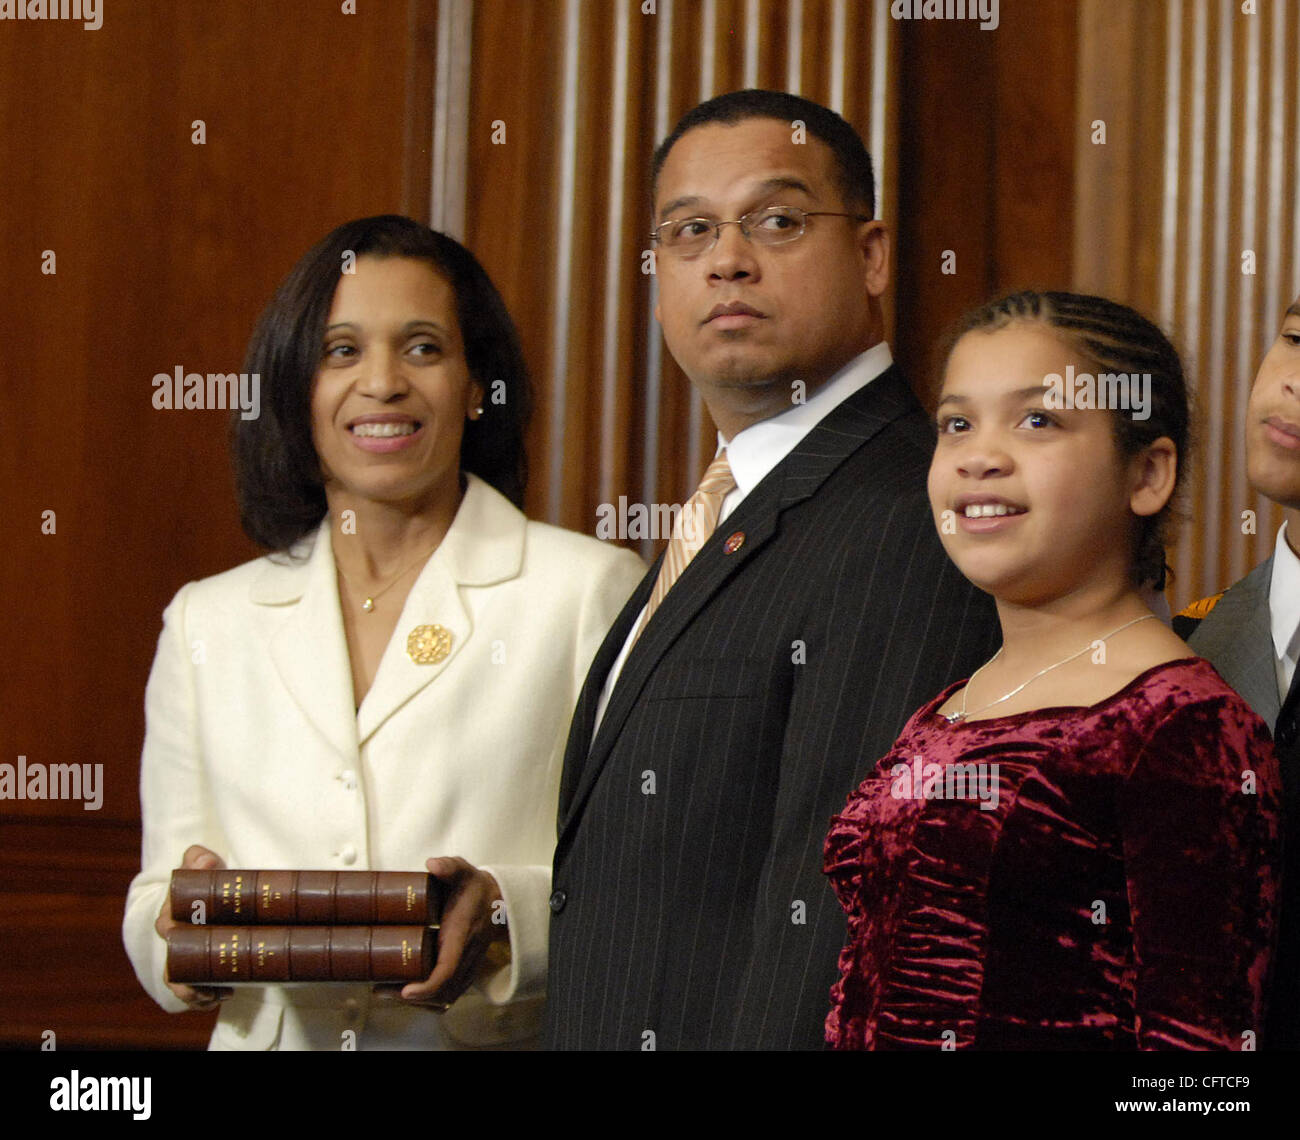 Jan 04, 2007 - Washington, DC, USA - KEITH ELLISON, the first Muslim to serve in the United States Congress, is sworn into office by Speaker of the House Nancy Pelosi. Ellison's family joined him for his swearing in ceremony. Stock Photo